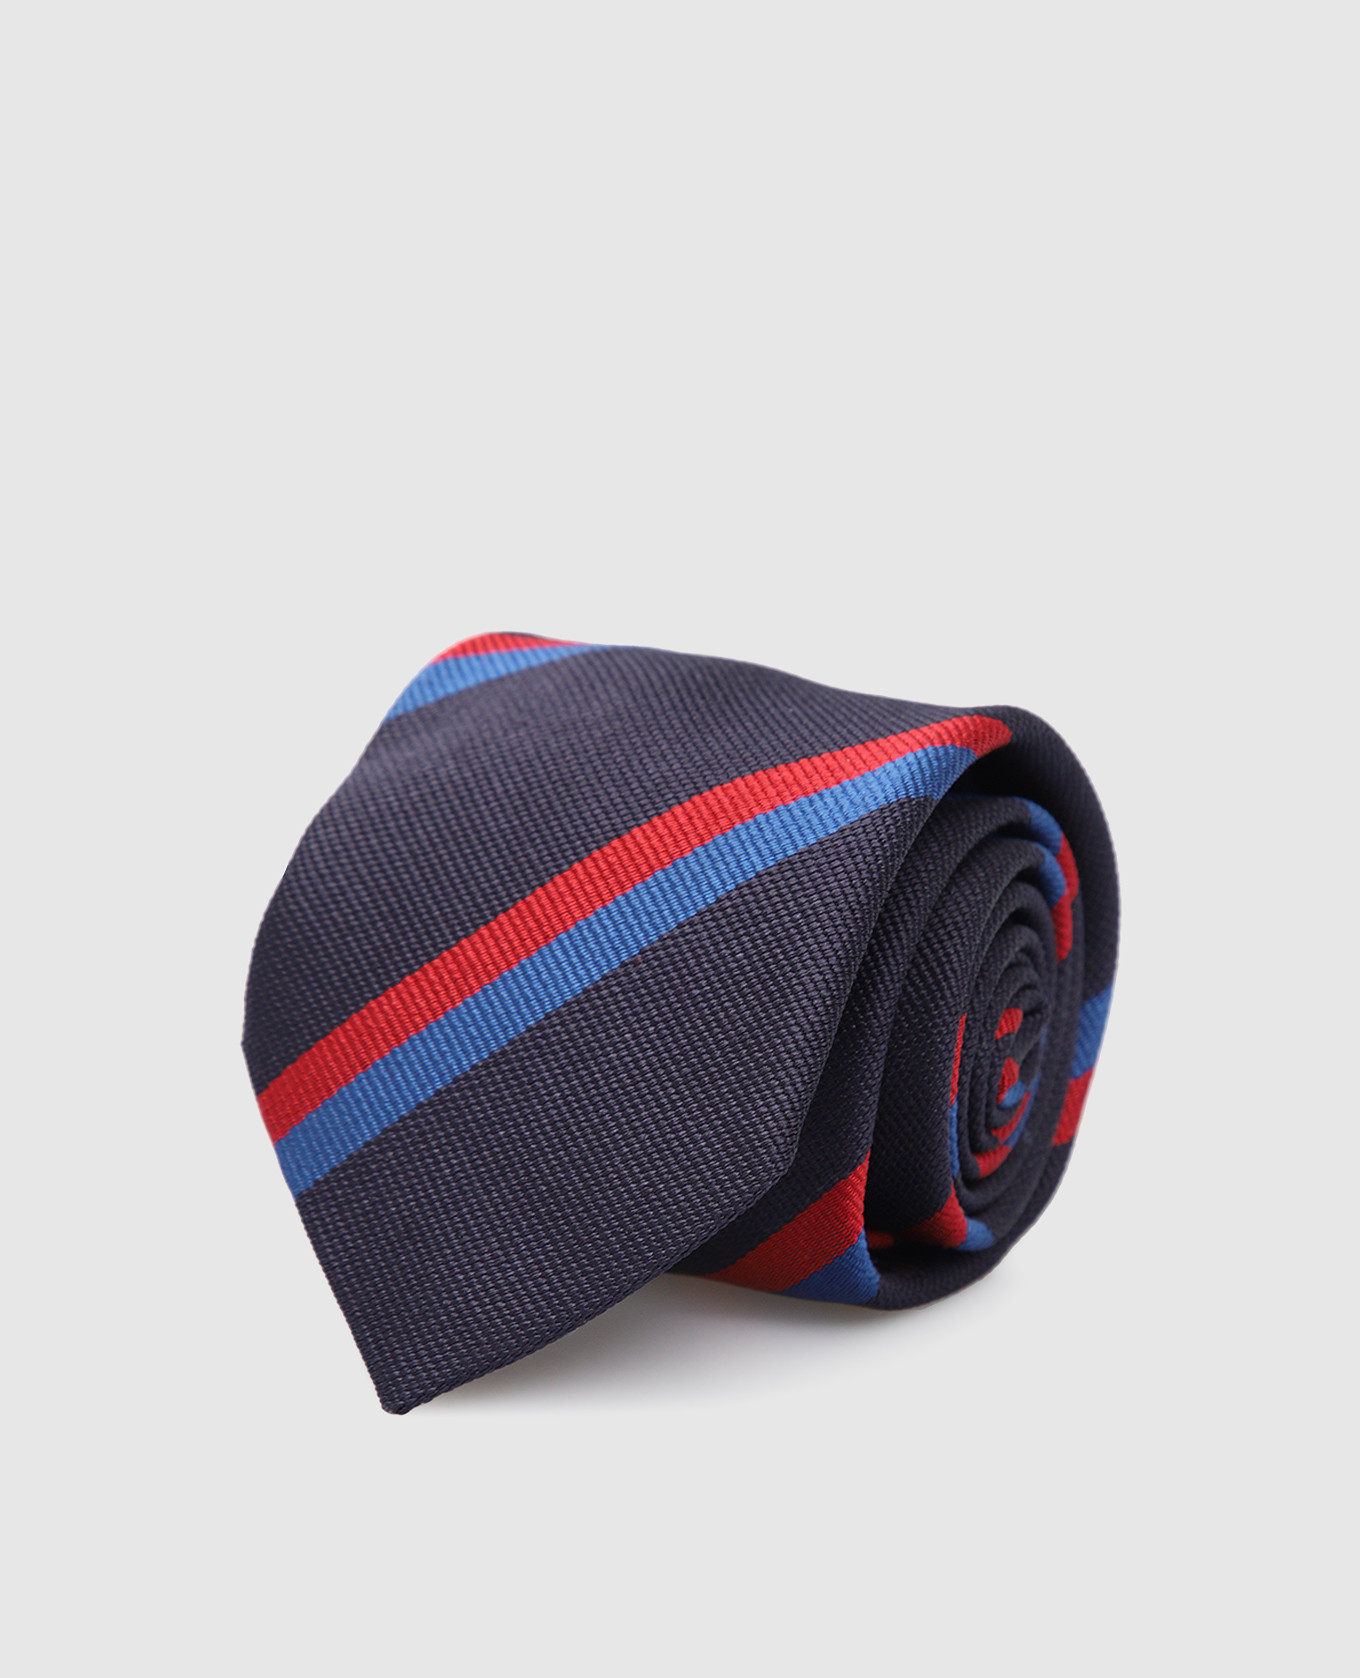 Children's silk tie with contrasting stripes